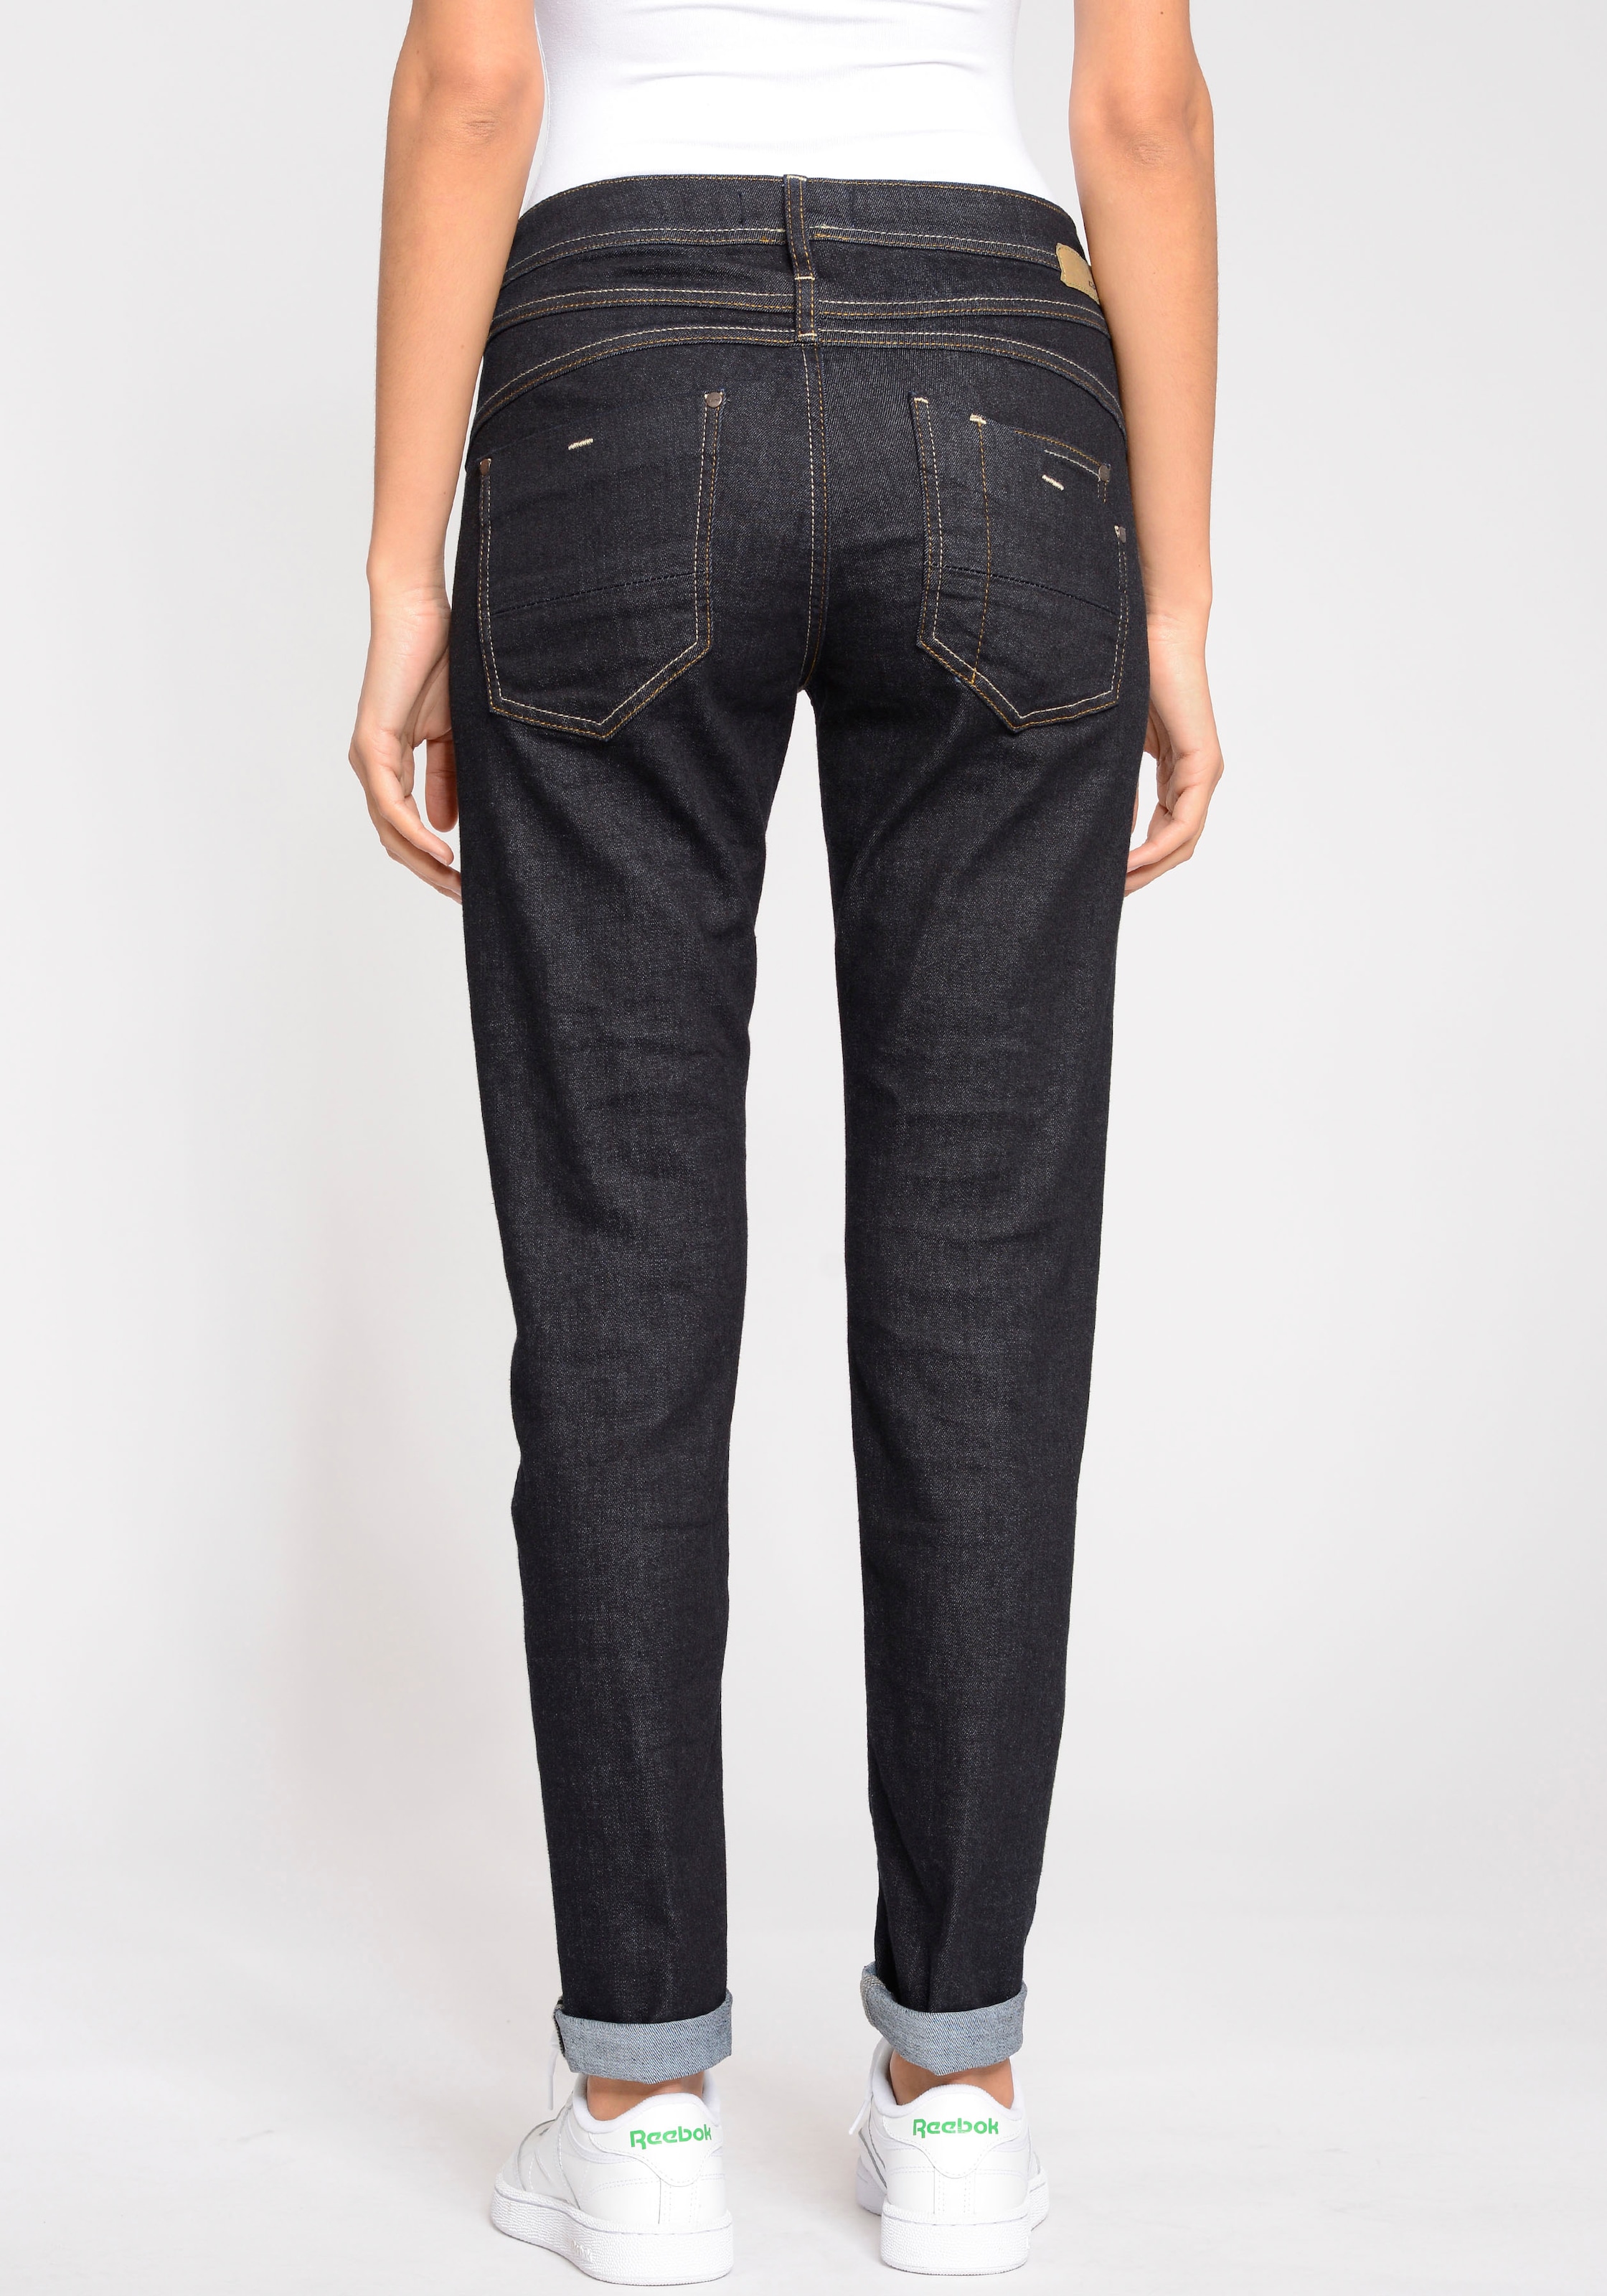 Used-Effekten GANG Fit«, Online mit Relax-fit-Jeans Relaxed im »94Amelie Shop OTTO